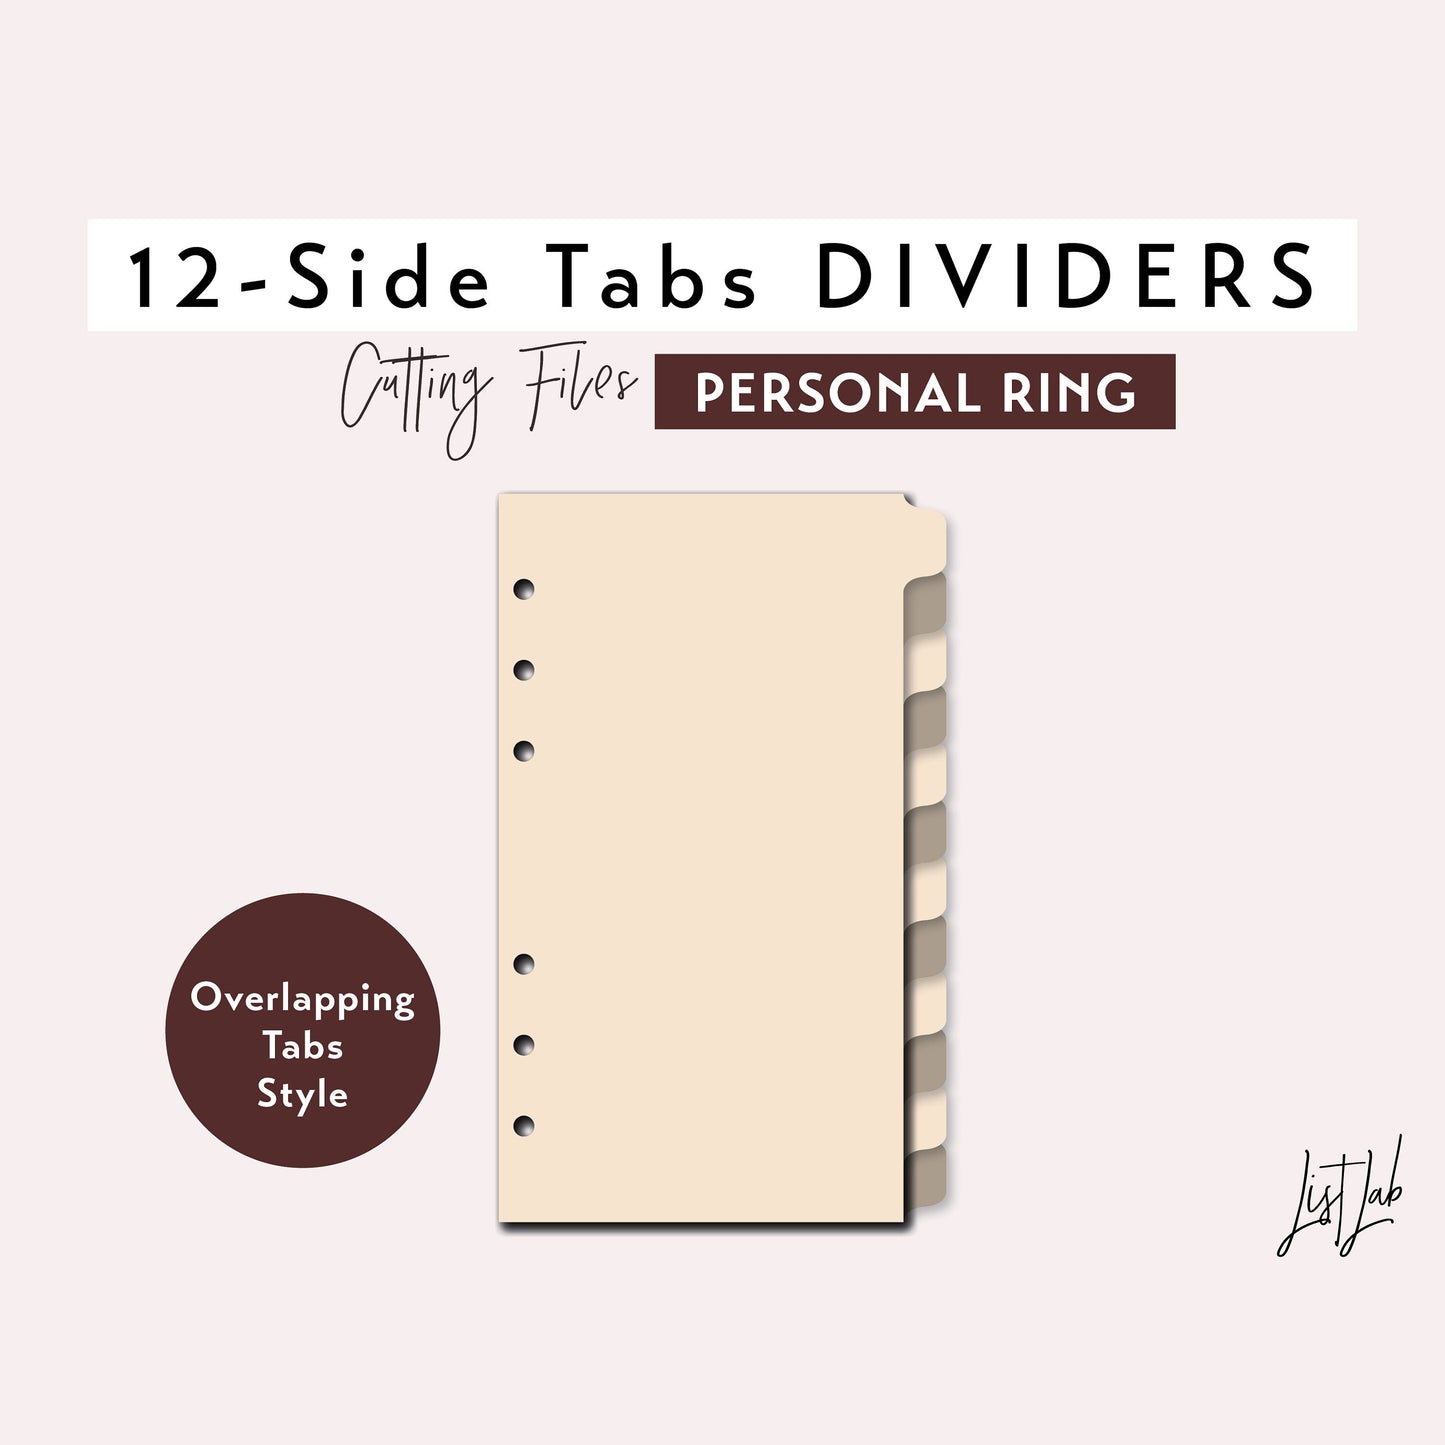 Personal Ring 12-SIDE TAB DIVIDERS Cutting Files Set